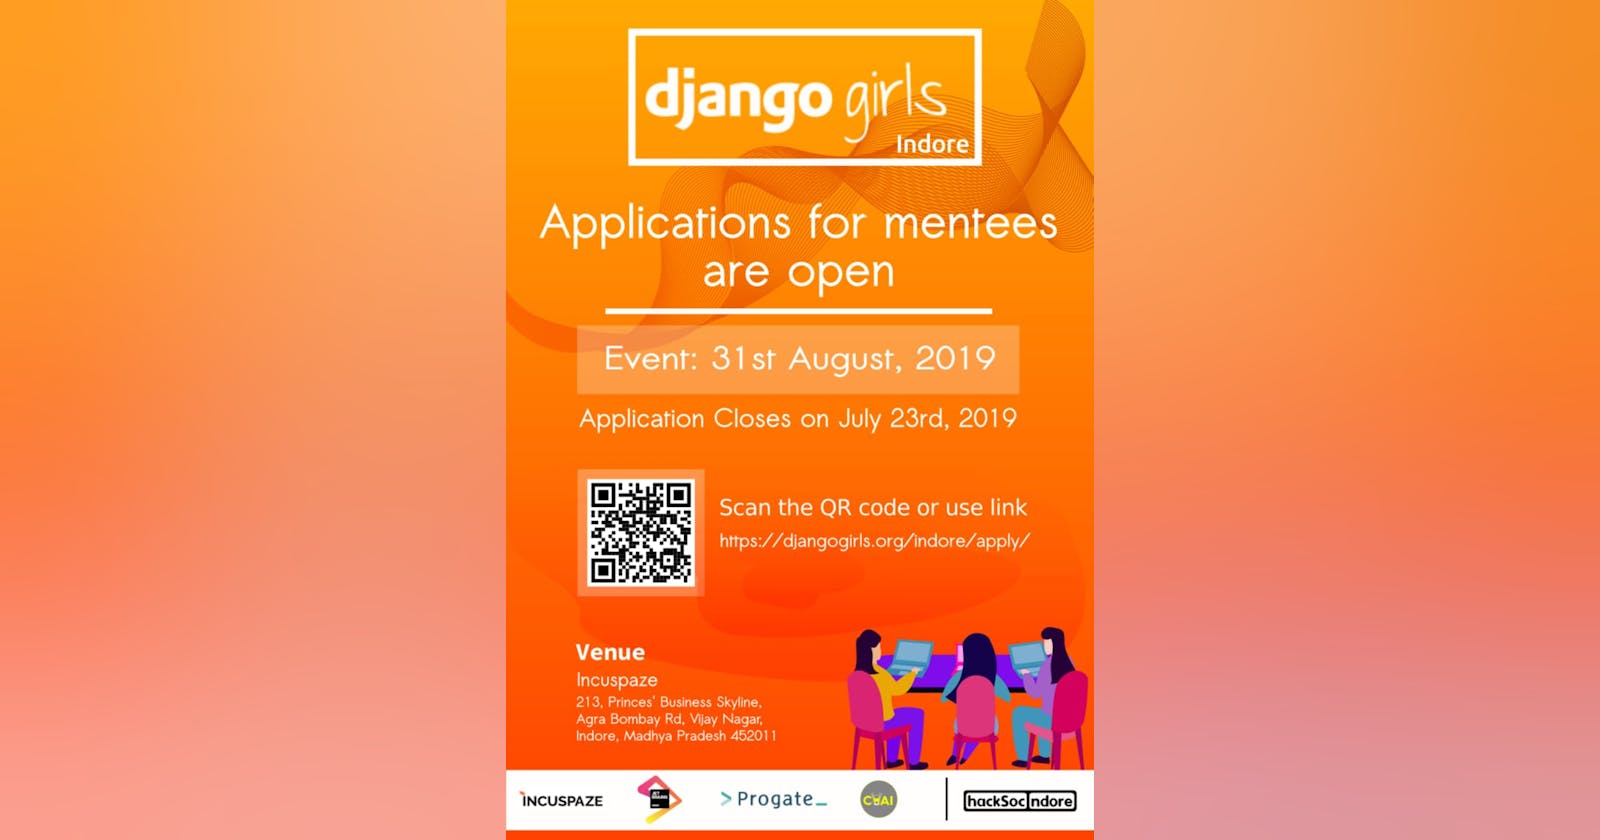 How you can organize DjangoGirls in your city?